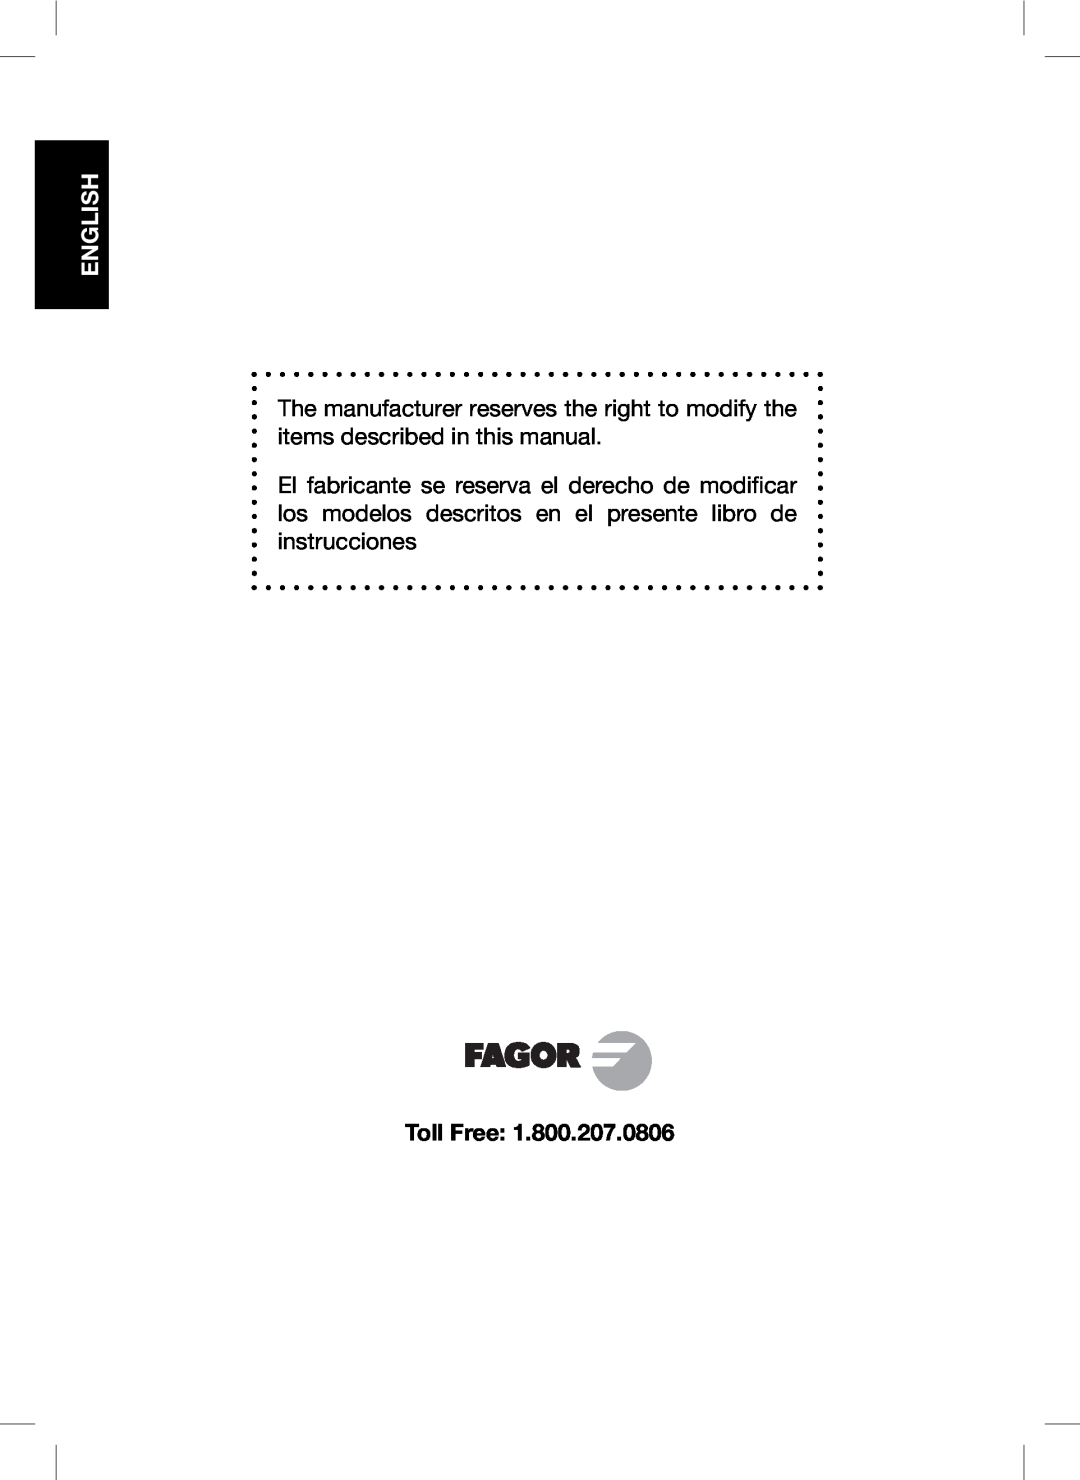 Fagor America Portable Induction Cooktop user manual Toll Free, English 